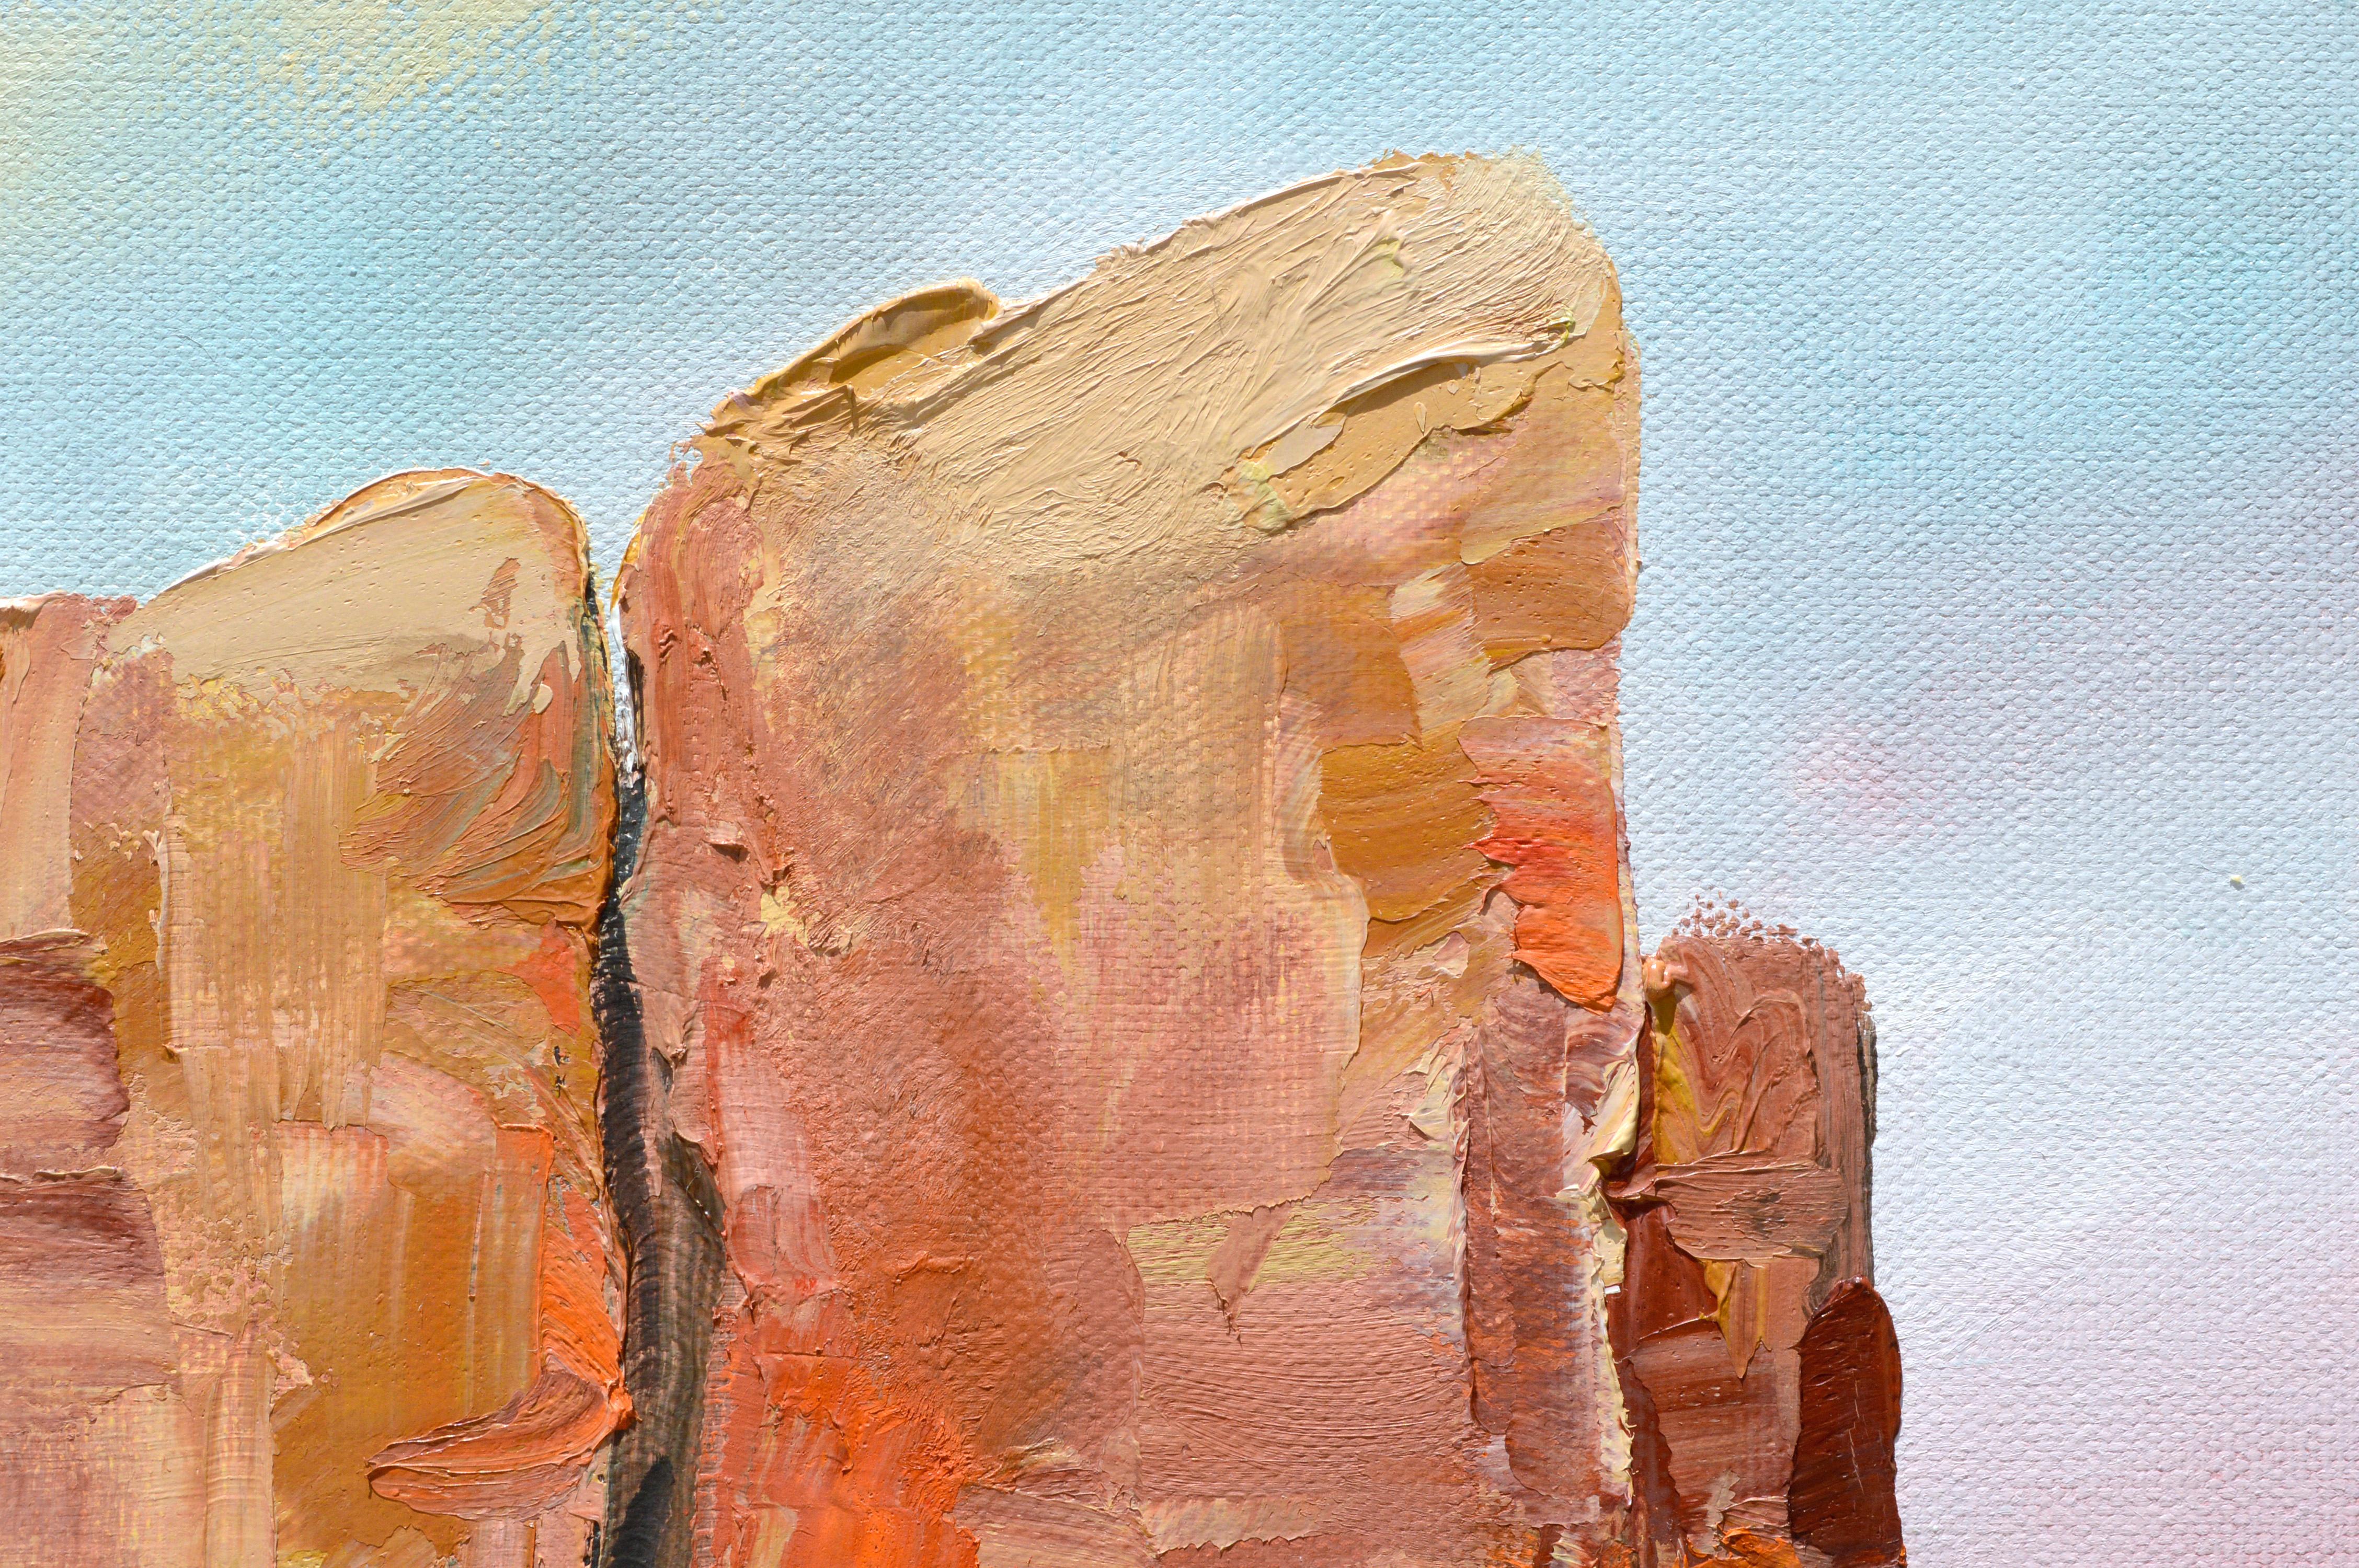 Road Near the Mesa, Contemporary Desert Red Rocks Vertical Landscape - Painting by Kathleen Murray